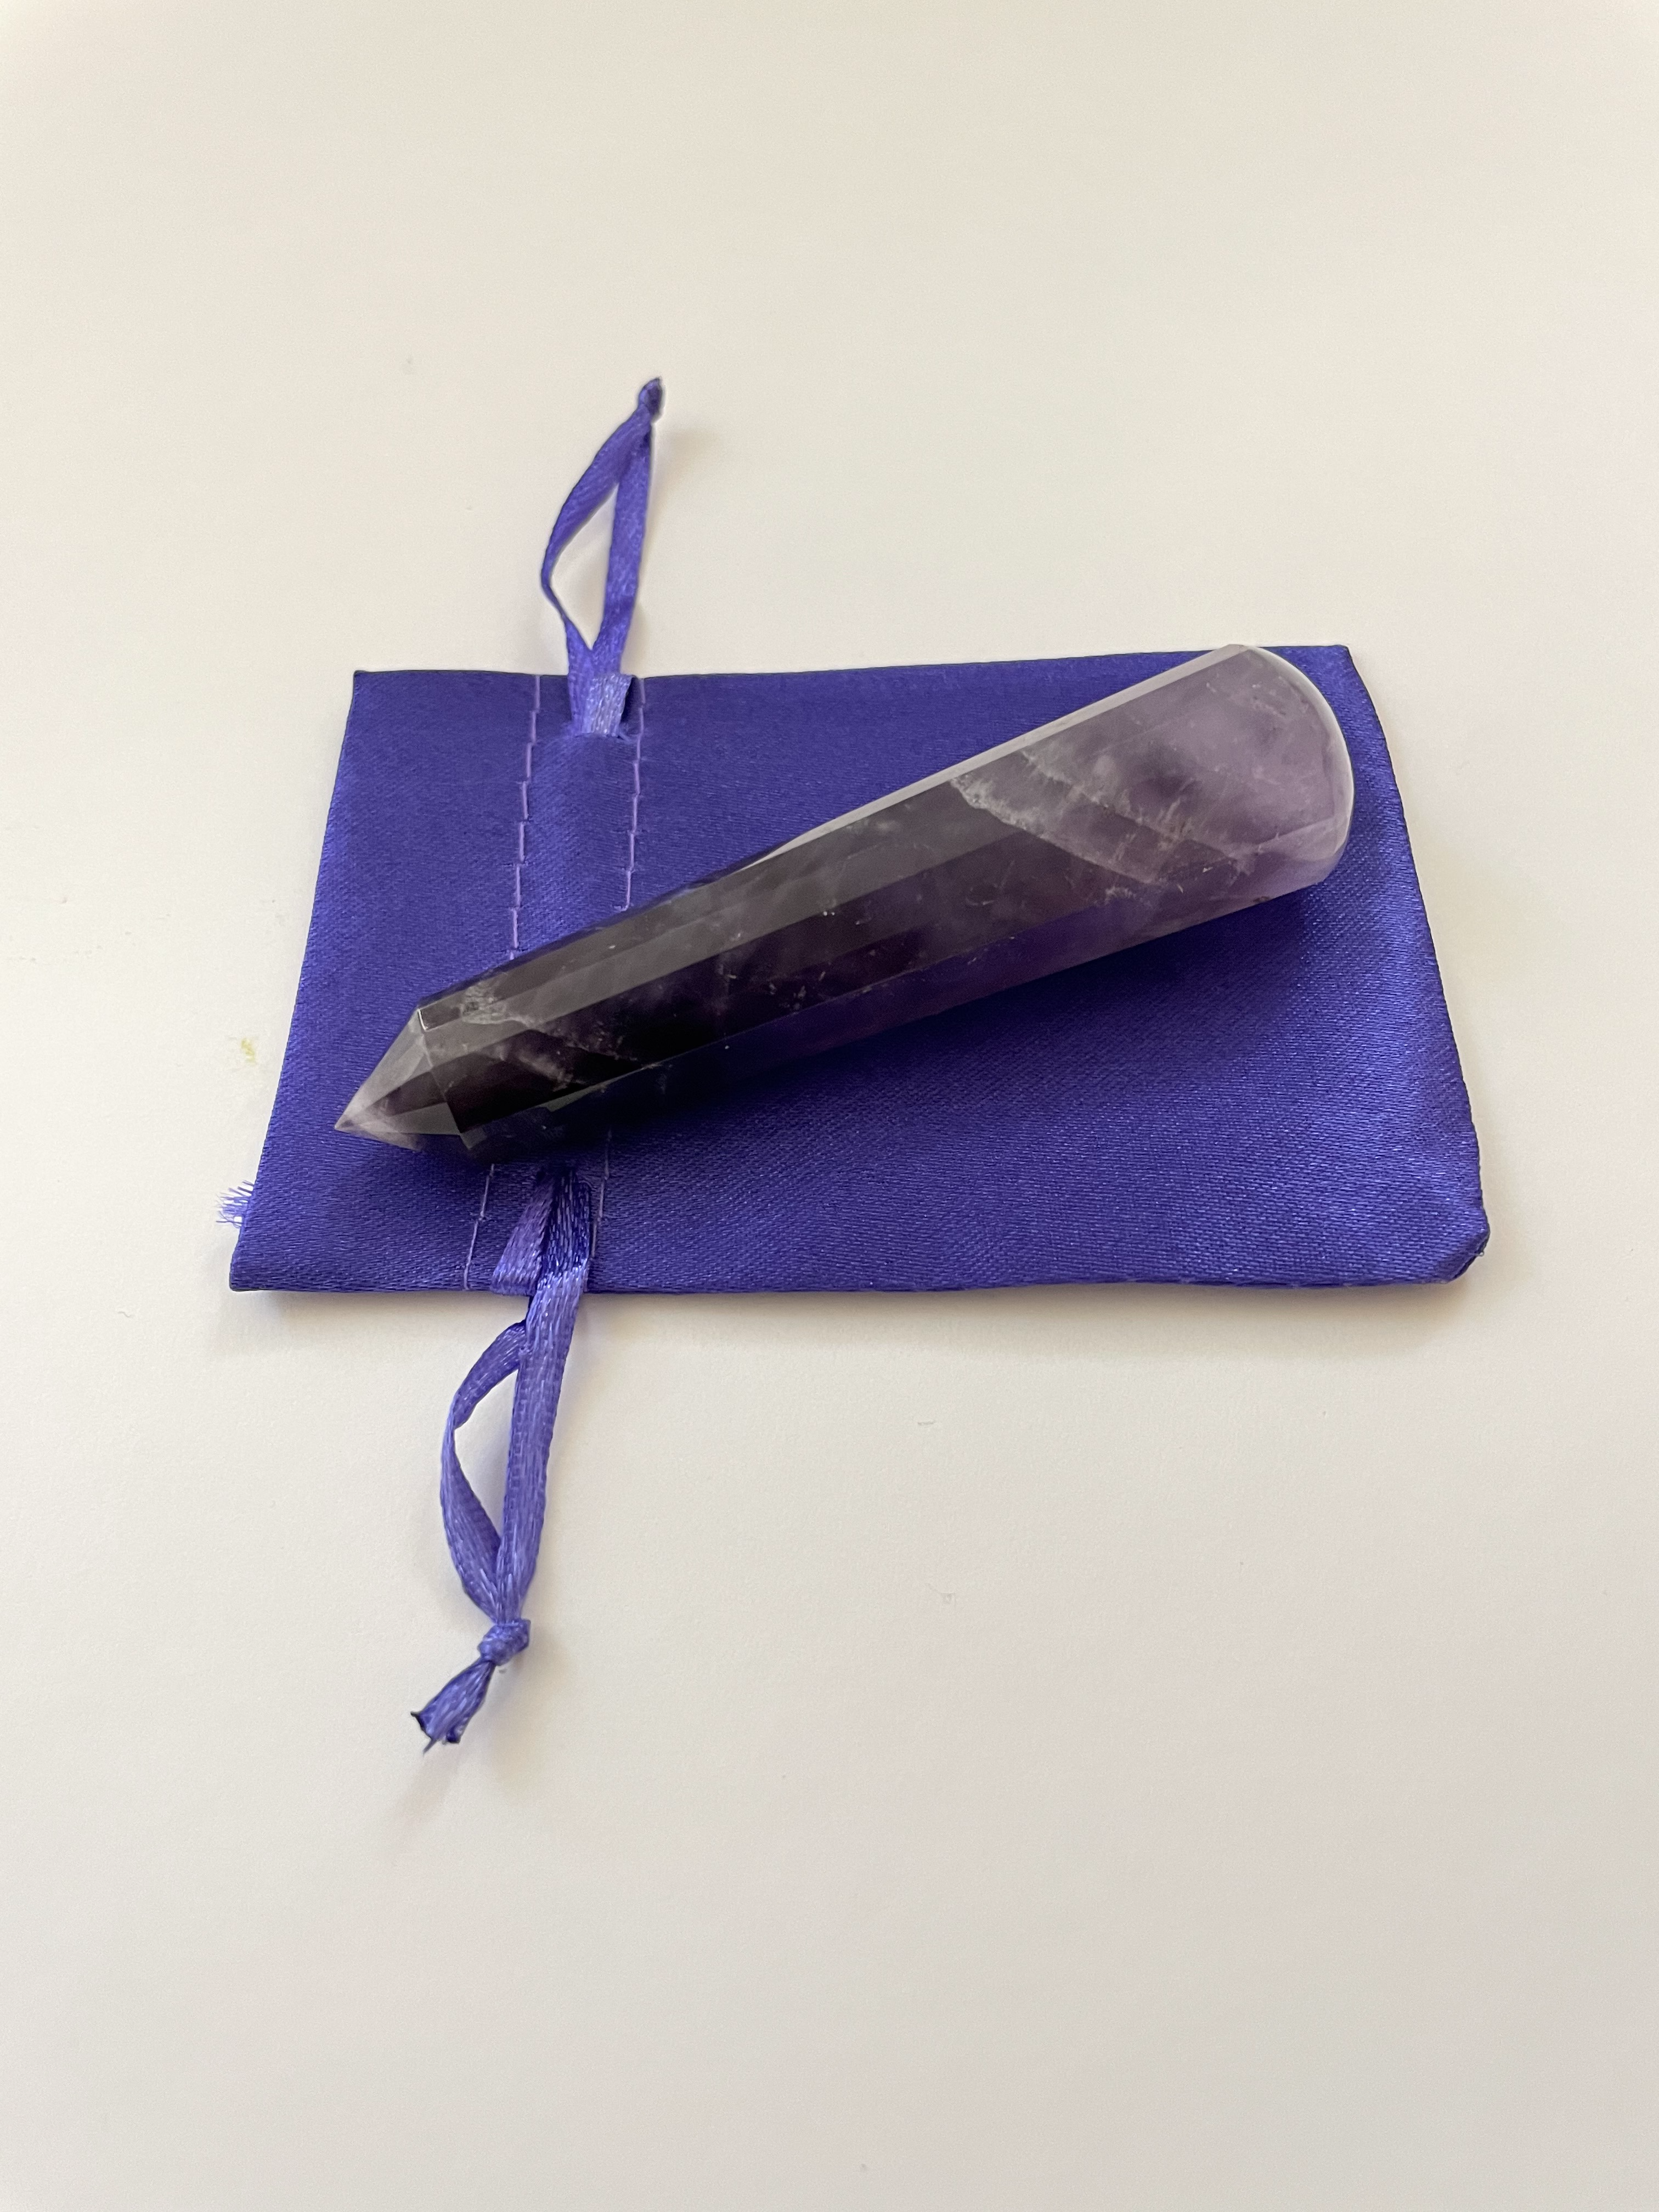 Alternate view. Gorgeous, 16-sided amethyst healing wand, with stunning craftsmanship. This high quality, deep purple amethyst wand can be used for healing and works especially well for "people recovering from any type of poor health - emotional, mental, physical or spiritual "and can aid in finding one's true path (ravenscrystals.com). It is approx. 3¾" long. Cost is $30.